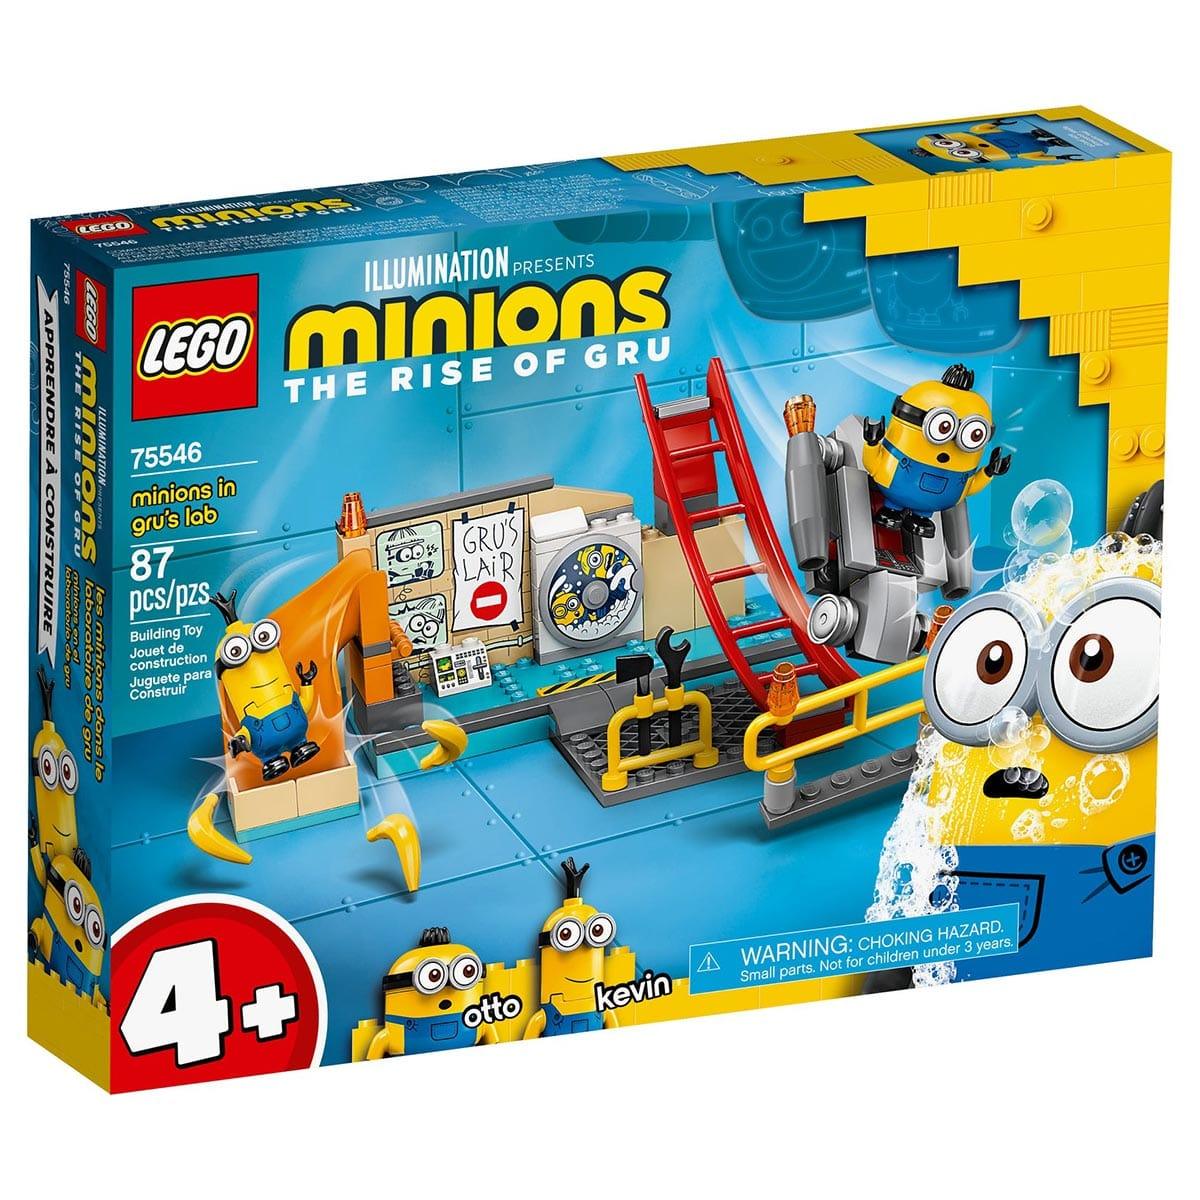 LEGO Minions, Minions in Gru's Lab 75546, Ages 4+ – Party Expert